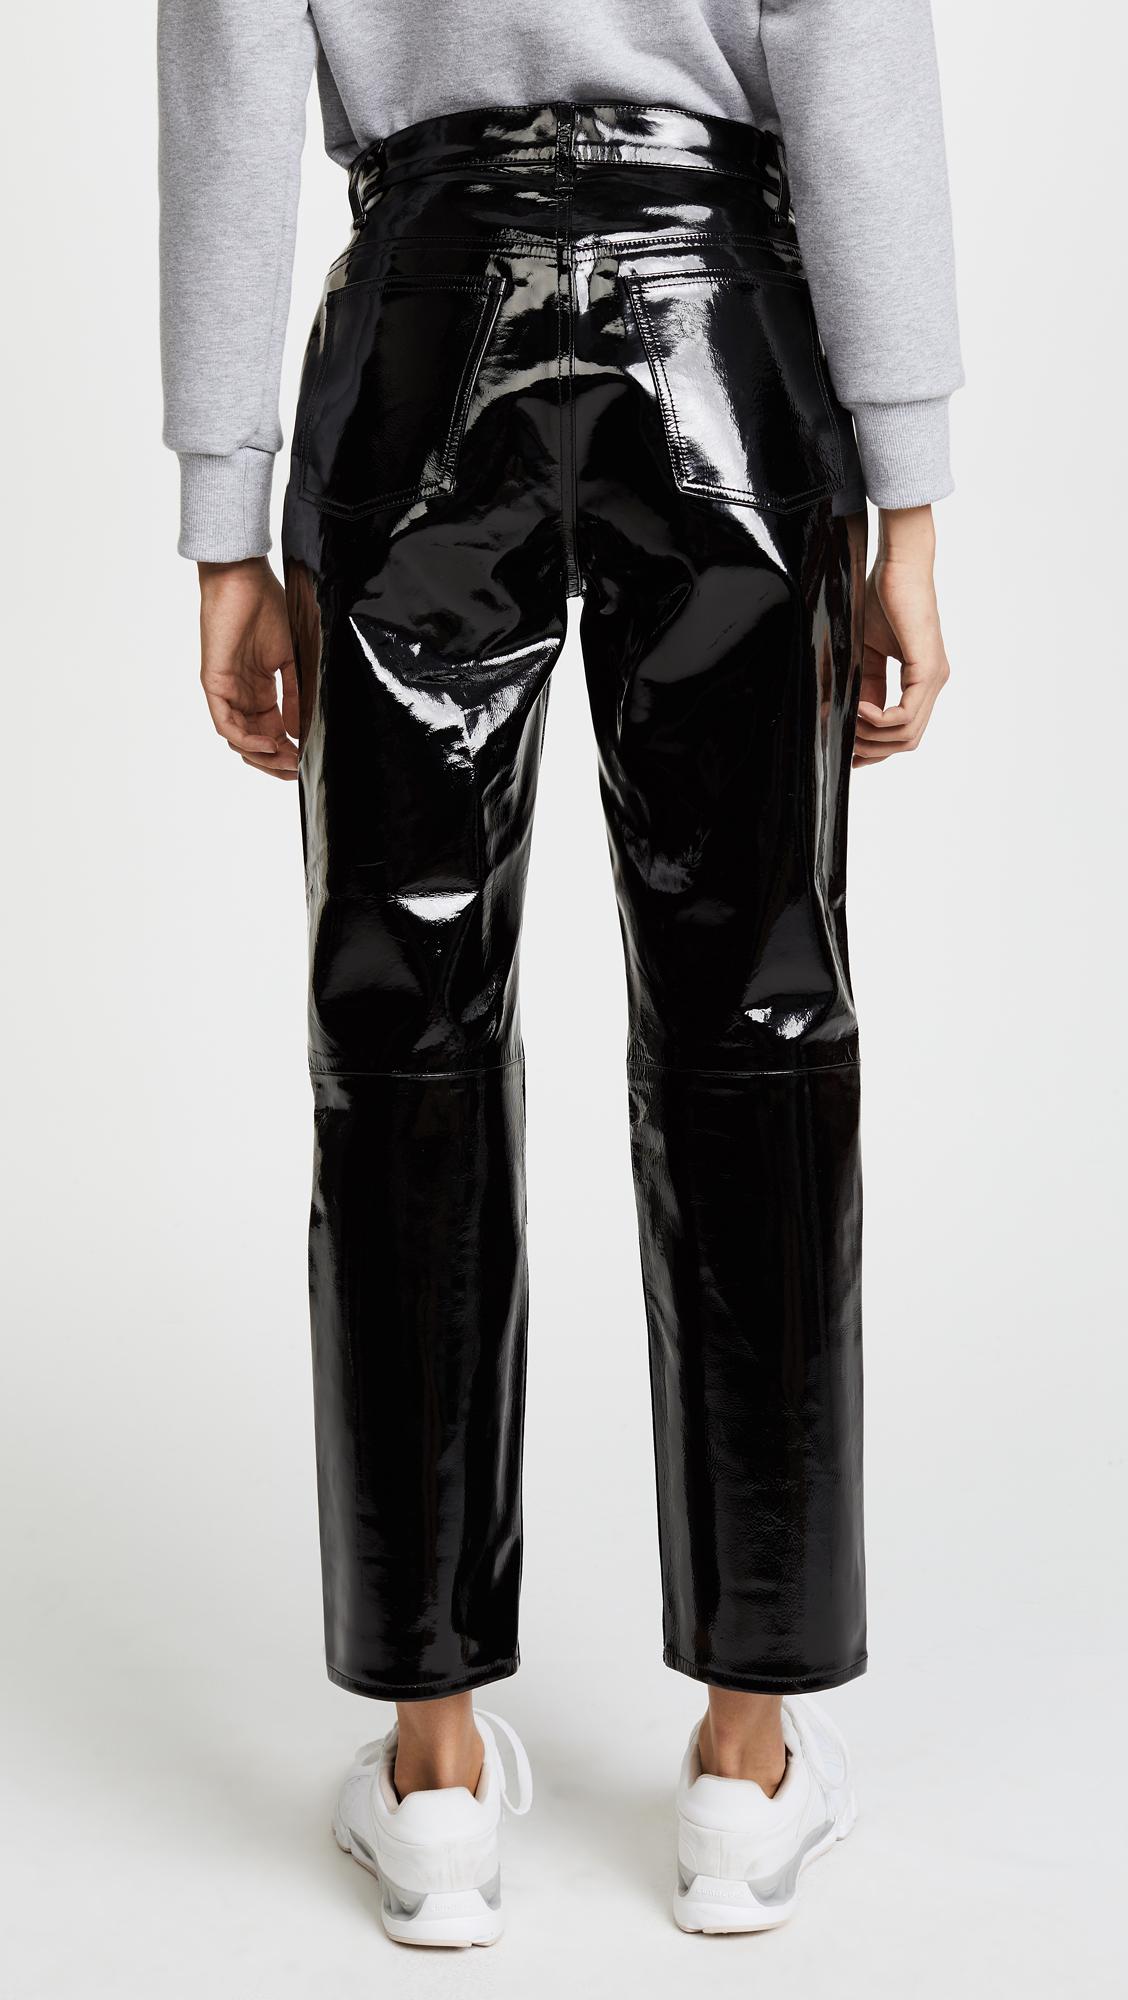 Rag & Bone The Straight Patent Leather Pants in Black - Lyst